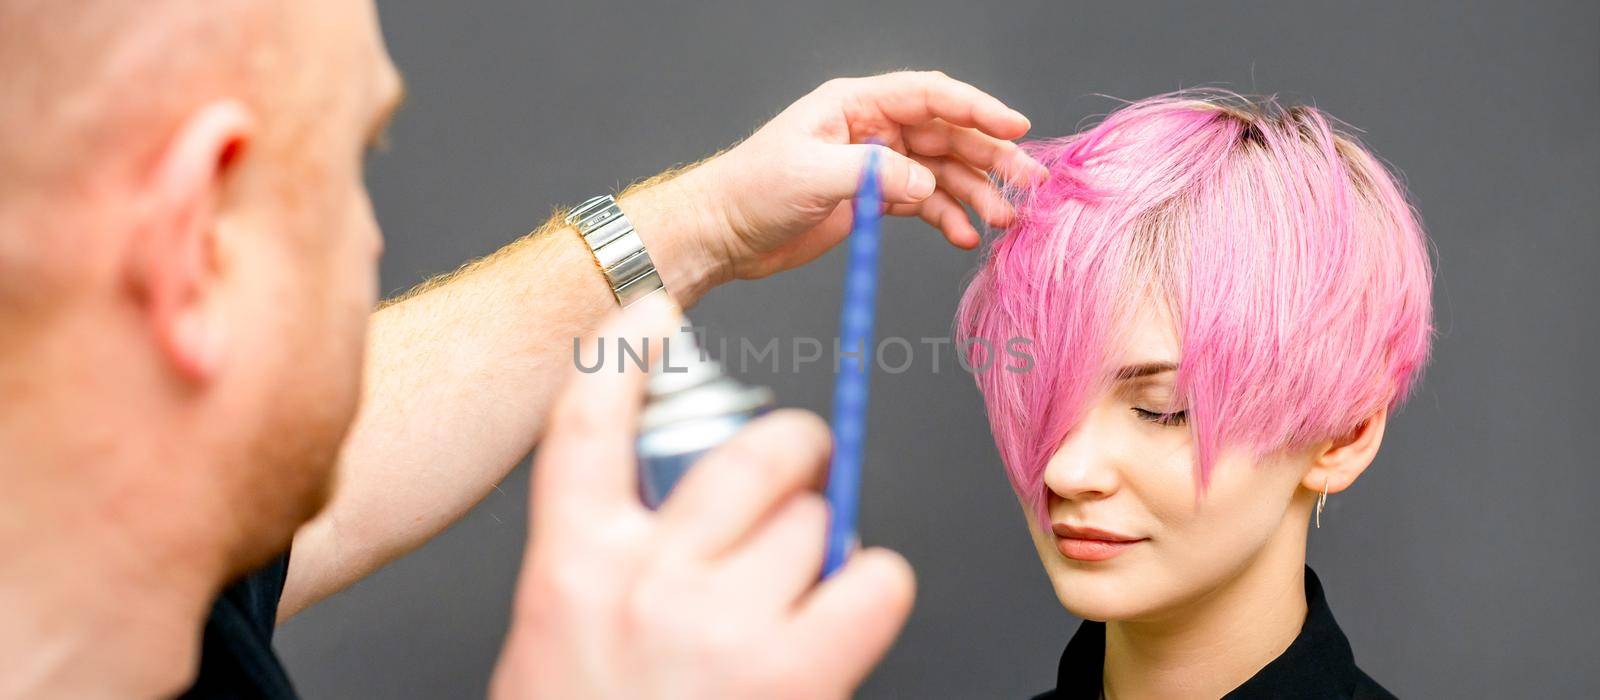 The hairdresser is using hair spray to fix the short pink hairstyle of the young caucasian woman in the hair salon. by okskukuruza